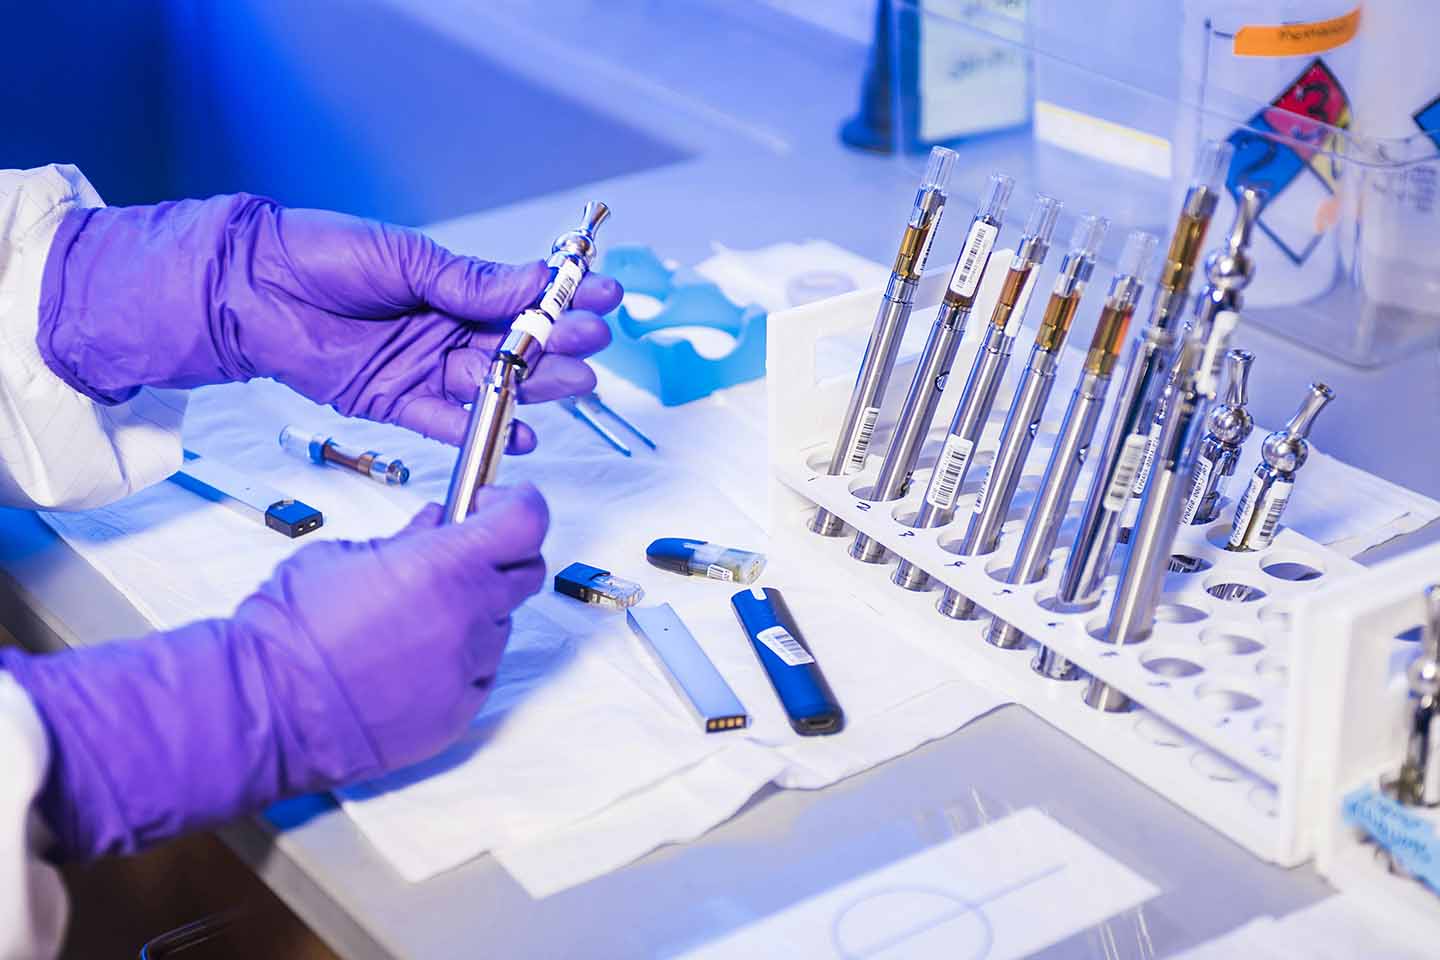 Disposable vapes being examined in a lab